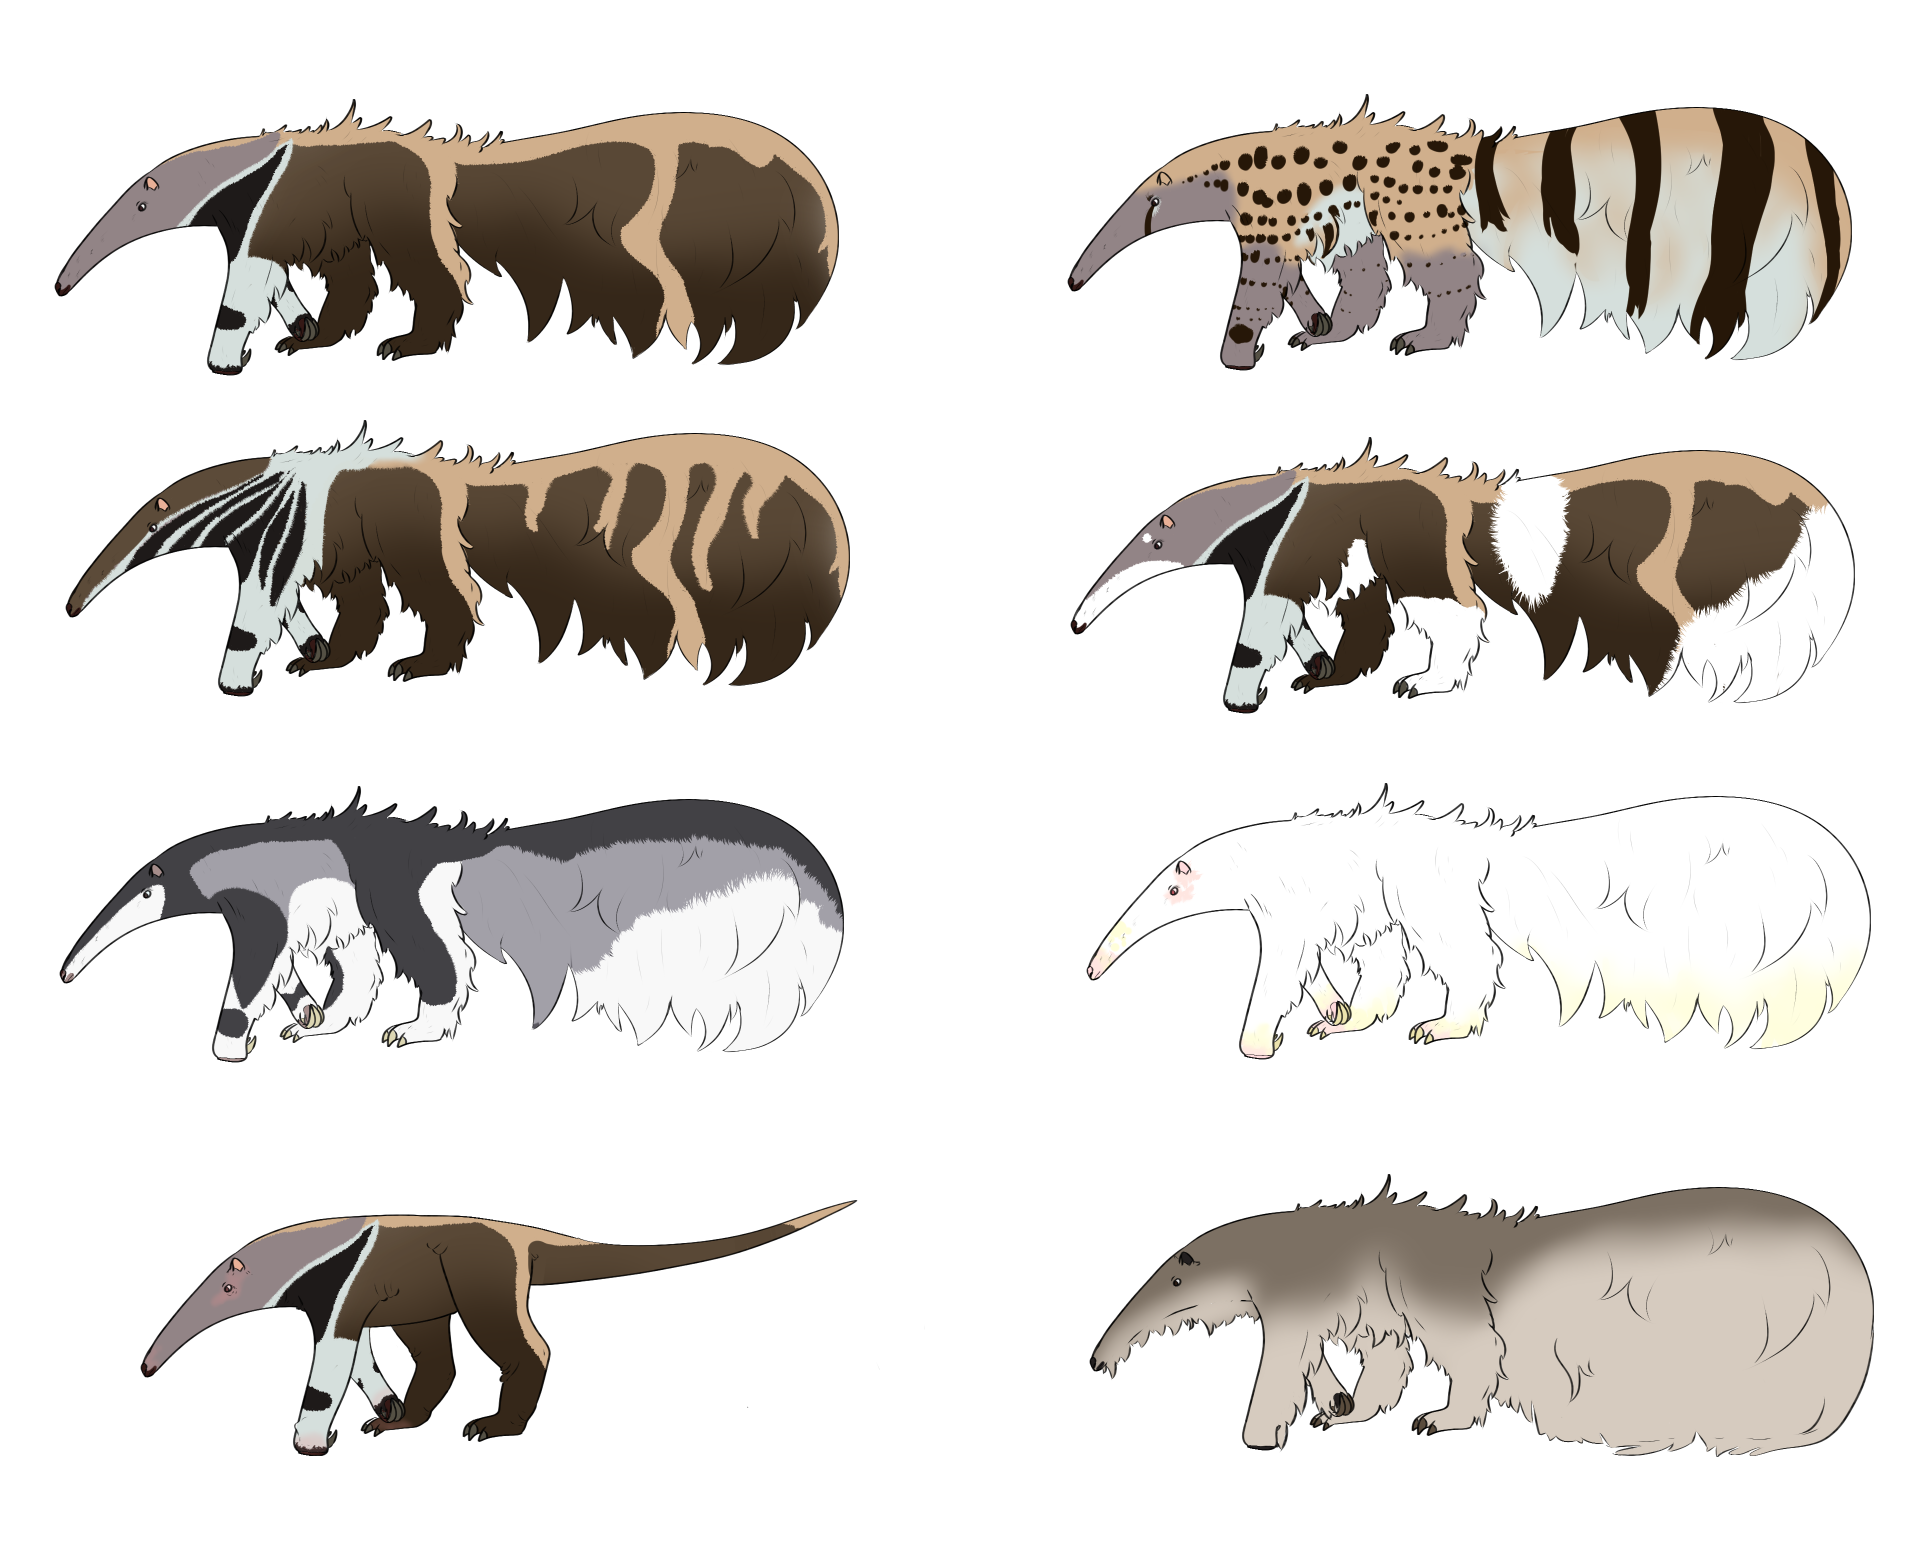 Eight anteaters walking horizontally in a grid pattern. Each of them is showing a different color scheme, as described below.